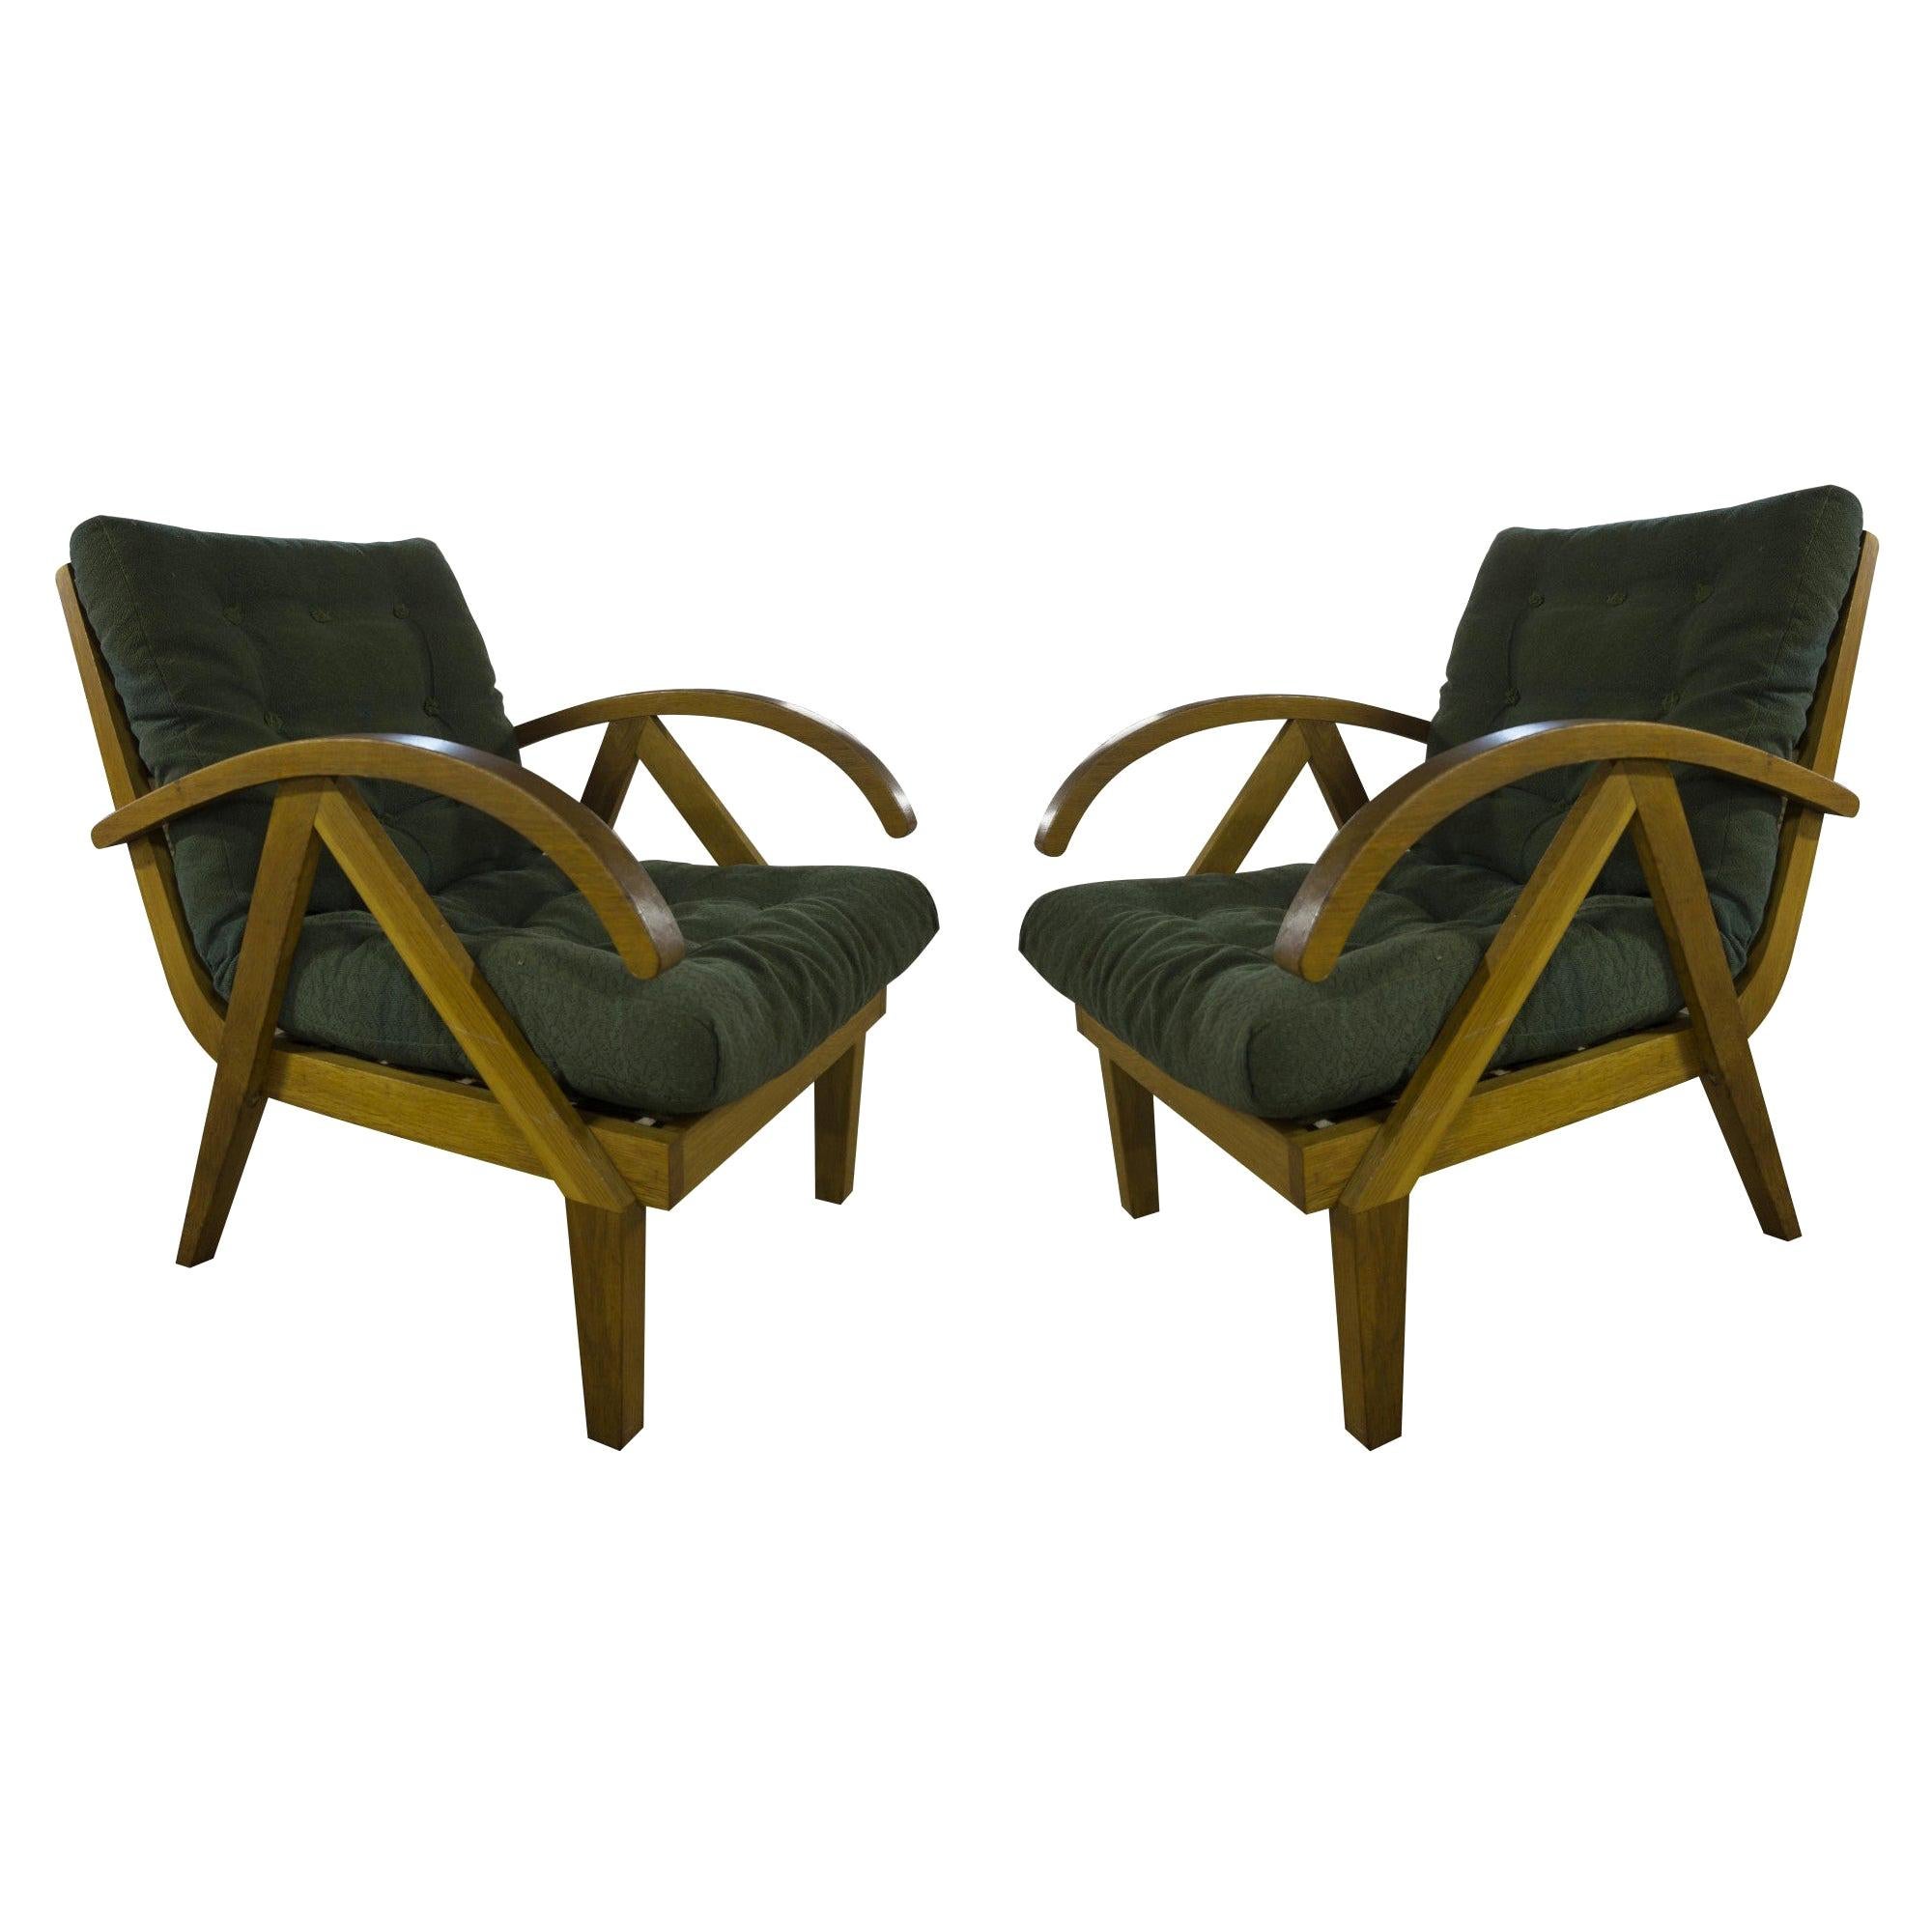 Pair of Lounge Midcentury Armchairs, 1960s, Central Europe